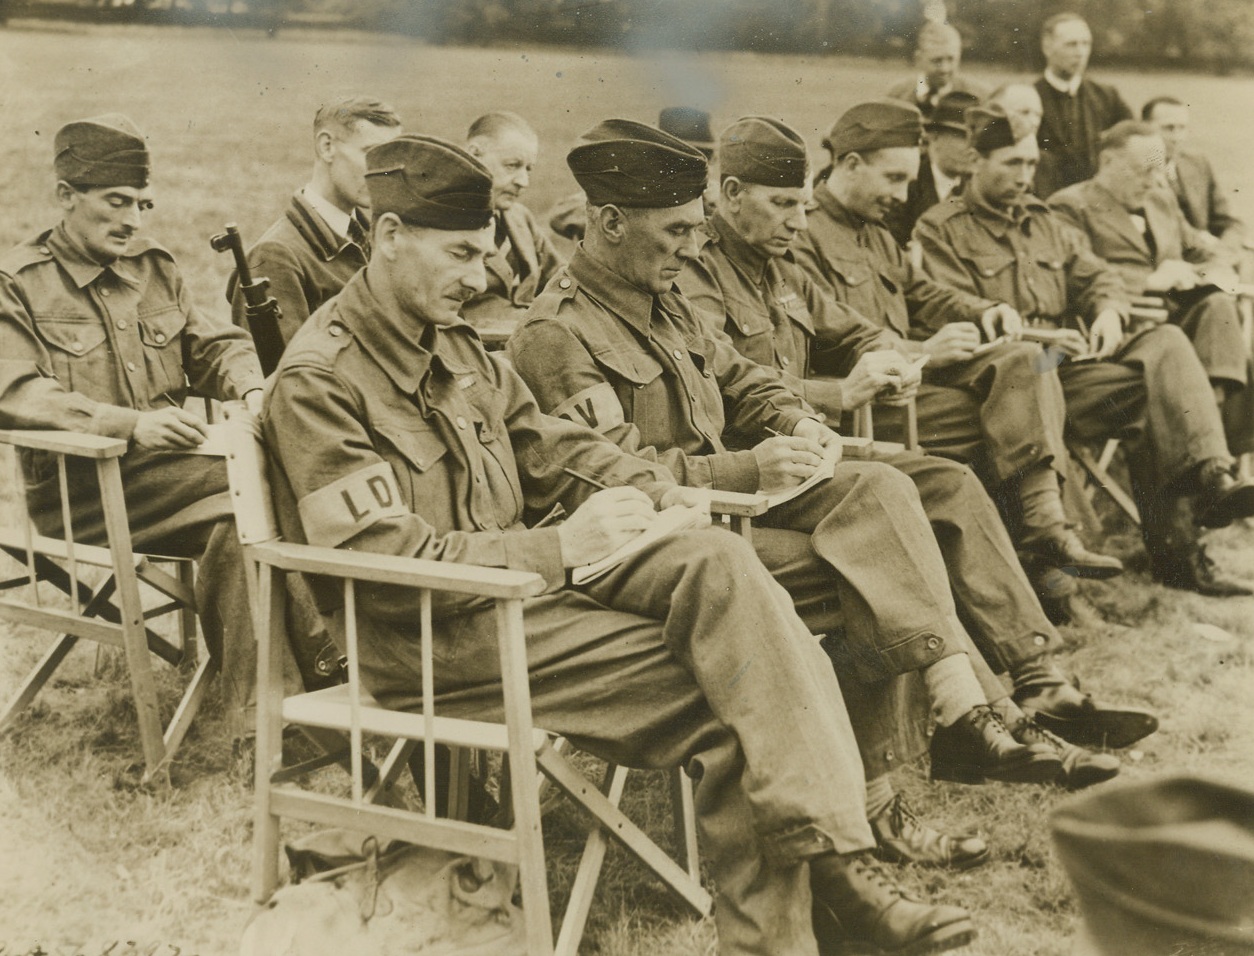 Britain’s Home Guard Studies Guerrilla Warfare, 8/7/1940  Middlesex, England—Members of Britain’s ever-increasing Home Guard who desire to have instruction in guerilla warfare tactics are attending a privately run school at Osterley Park. The courses are designed to show how to improvise to meet new situations and to use guile in overcoming the enemy. All instructors are experienced veterans. Here, some of the students take notes during an open air lecture. Credit: ACME;